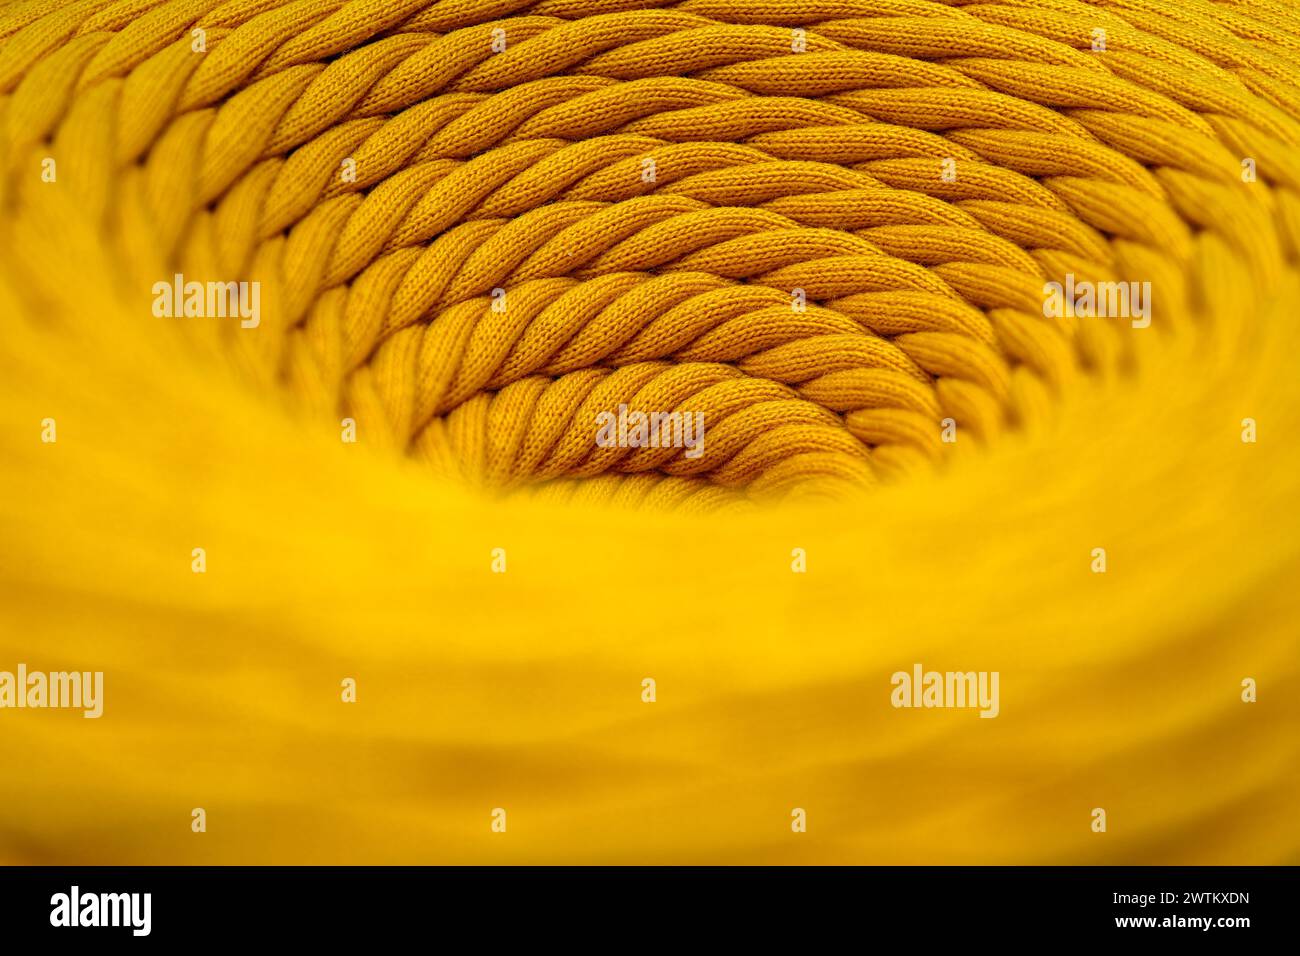 Skein of yellow braided synthetic cord, close-up shot, selective focus, abstract textile industry background Stock Photo